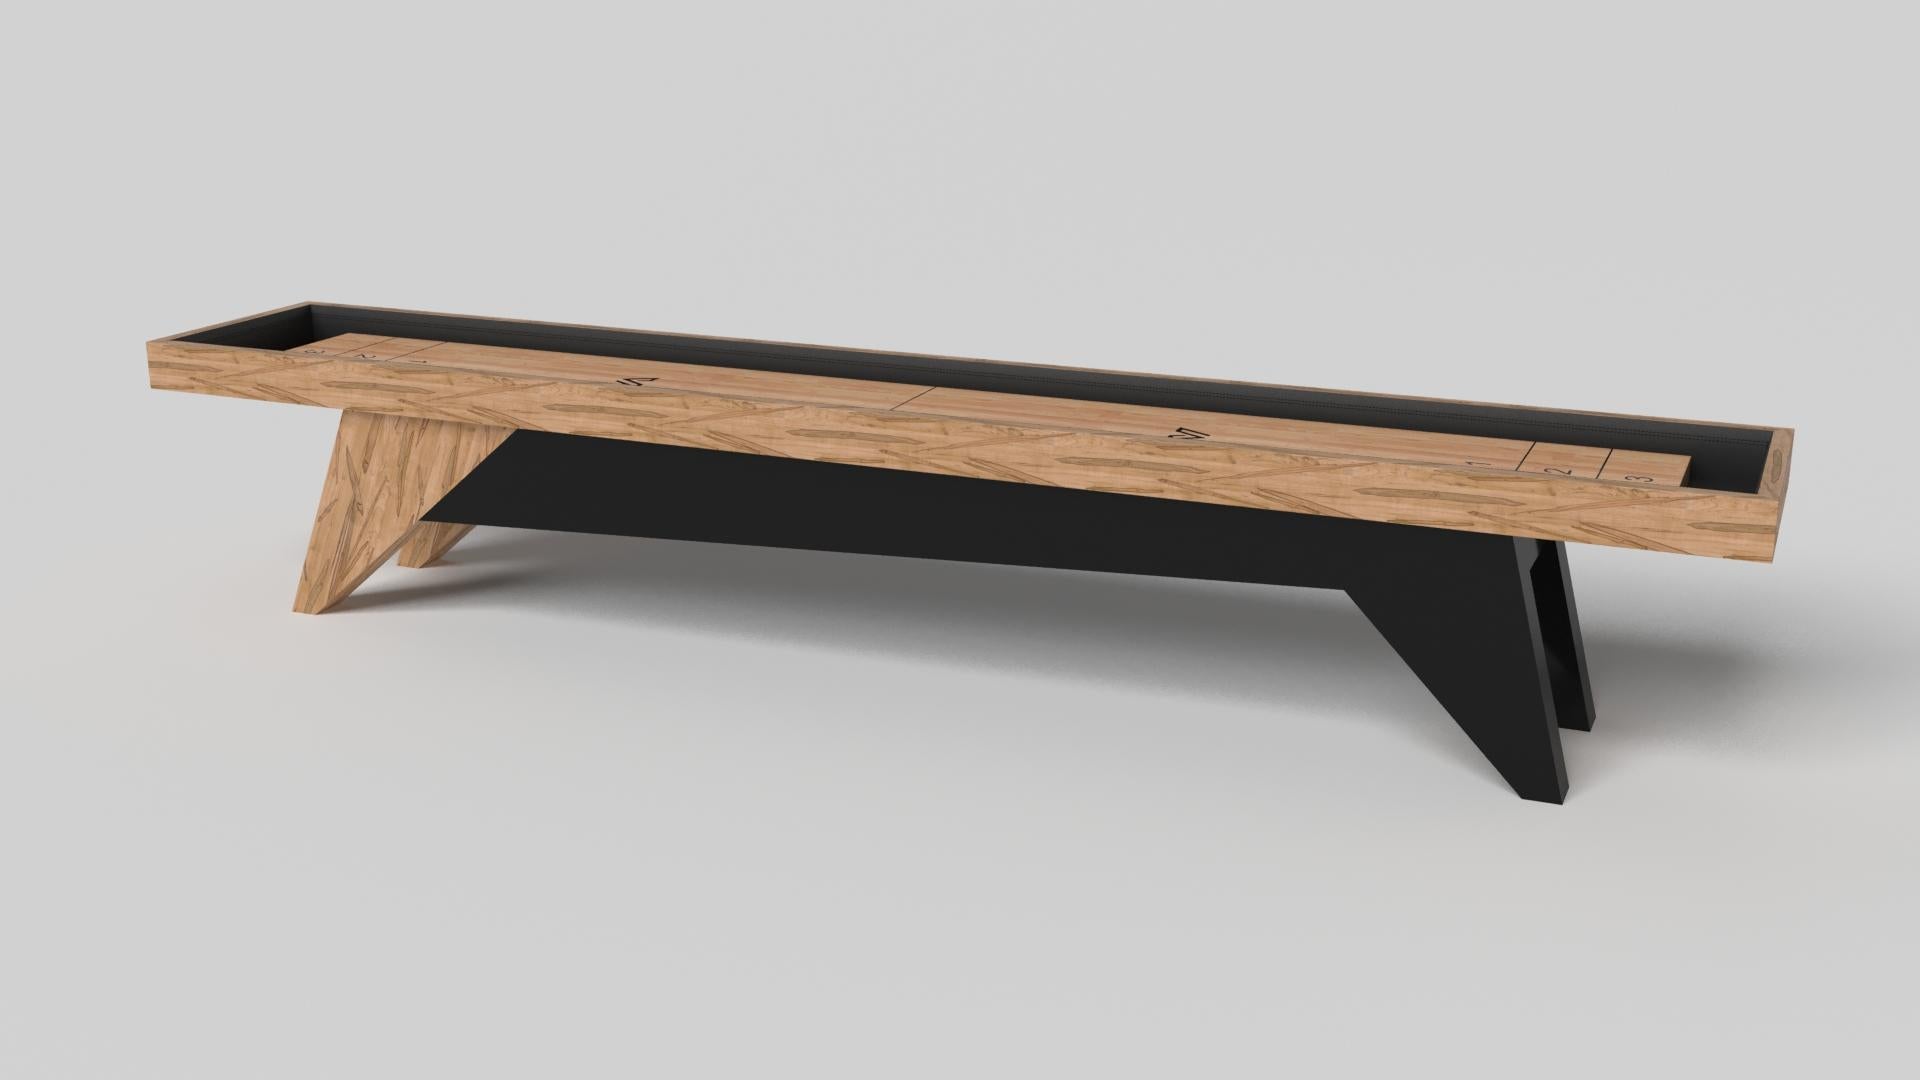 Simple yet sophisticated, the Mantis shuffleboard table puts a fresh, modern spin on a classic four-legged design. Sharp angles and tapered legs provide sleek stability.

Size:

22 Foot - 264”X32”X34”
Playing Area Of 248”X20”